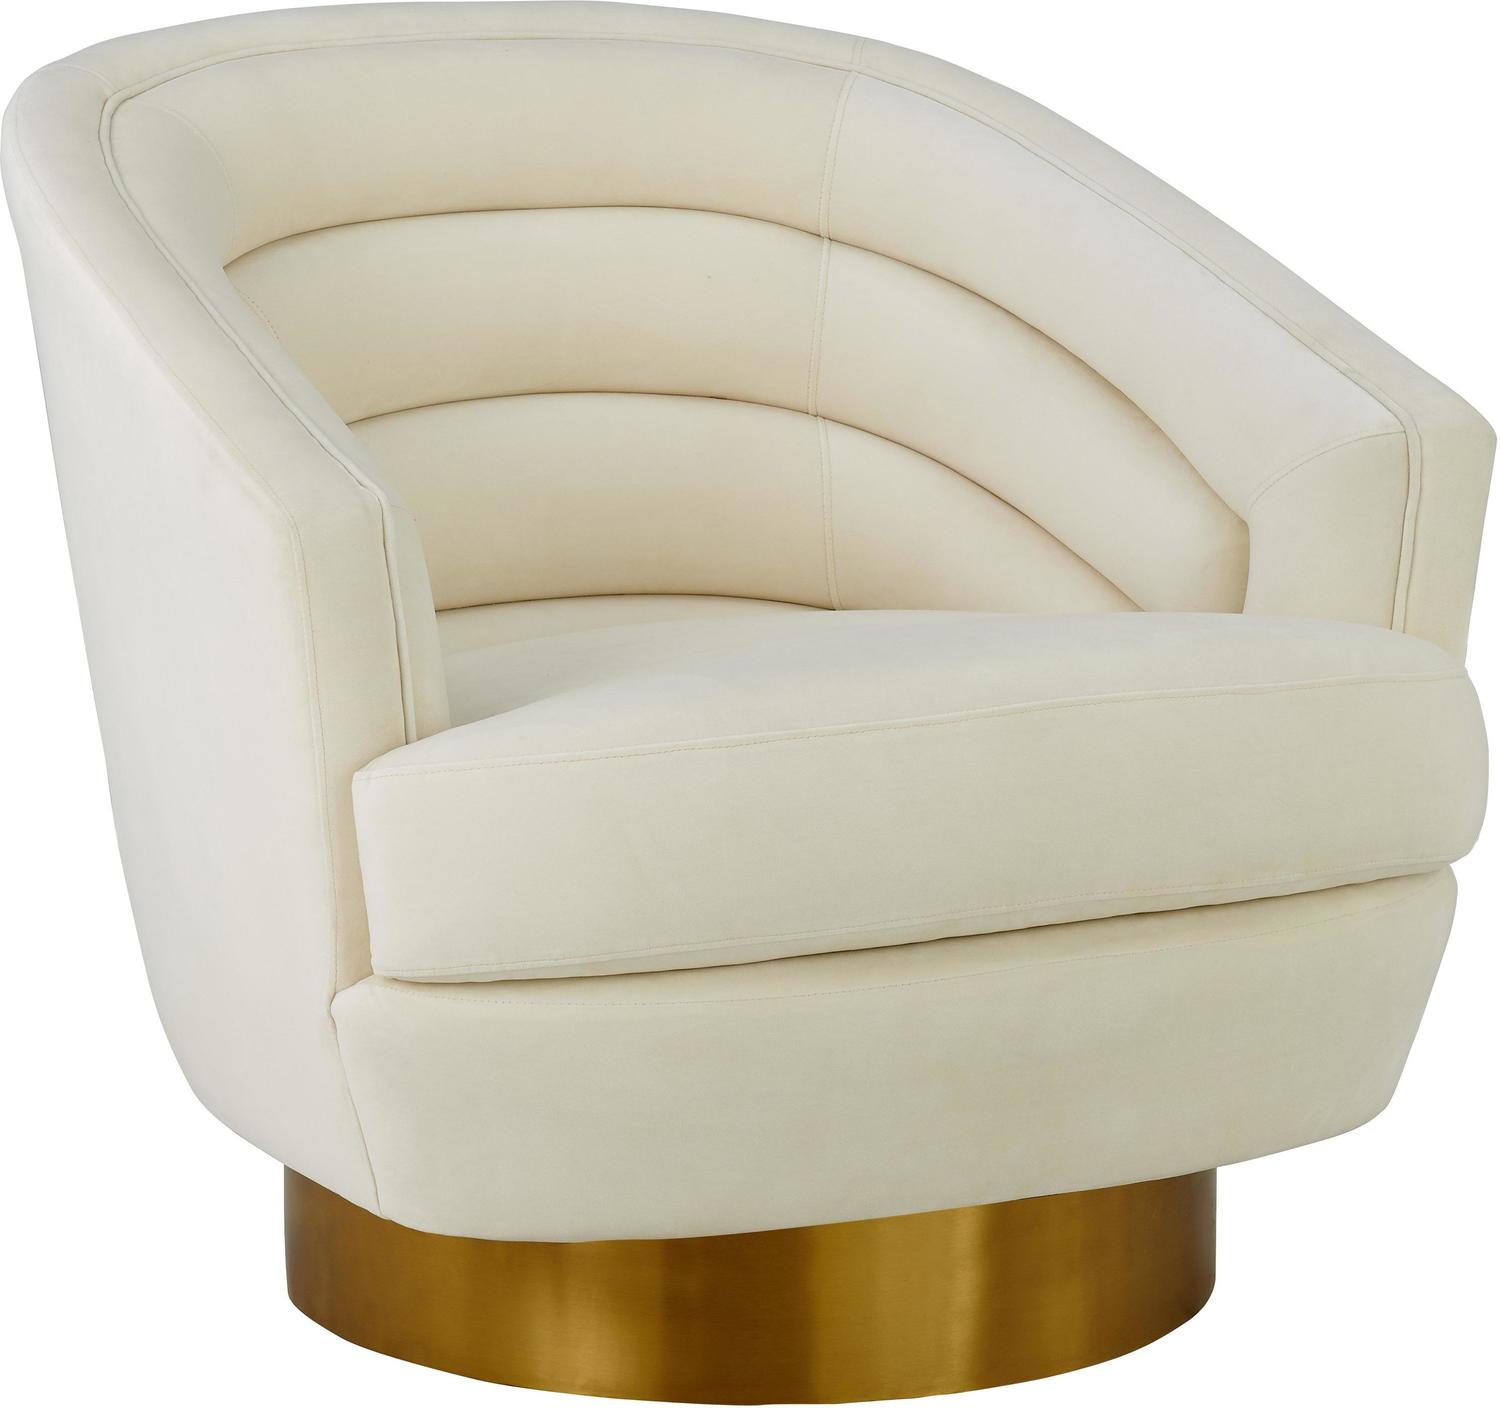 occasional chair with arms Tov Furniture Accent Chairs Cream